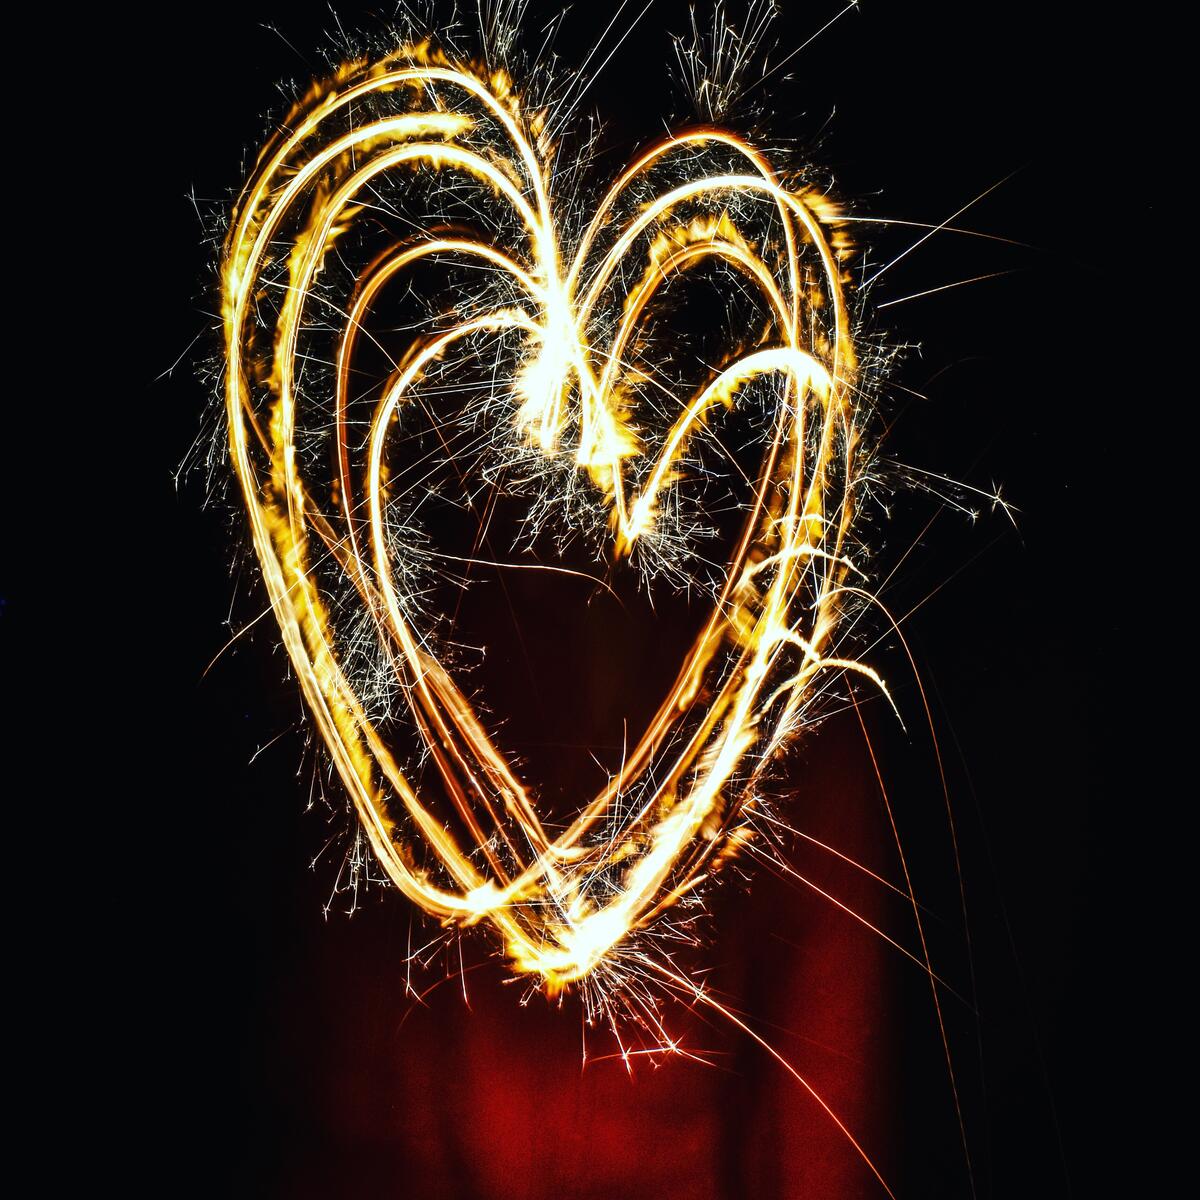 A heart of sparklers